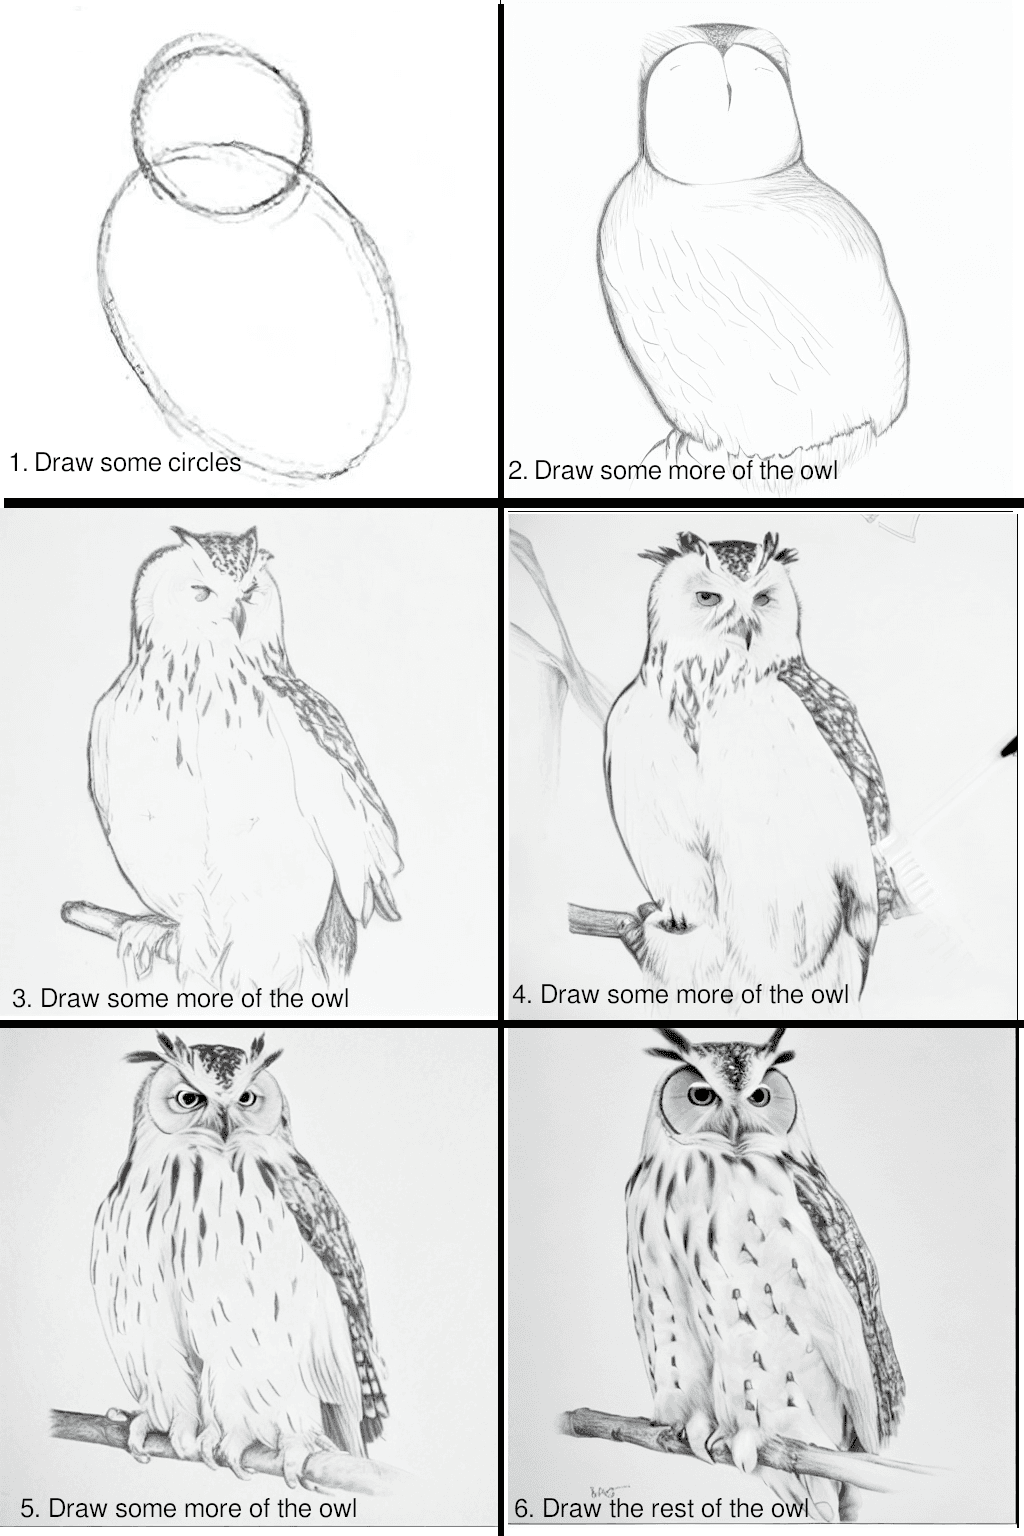 AI fills in the missing steps to draw an owl meme